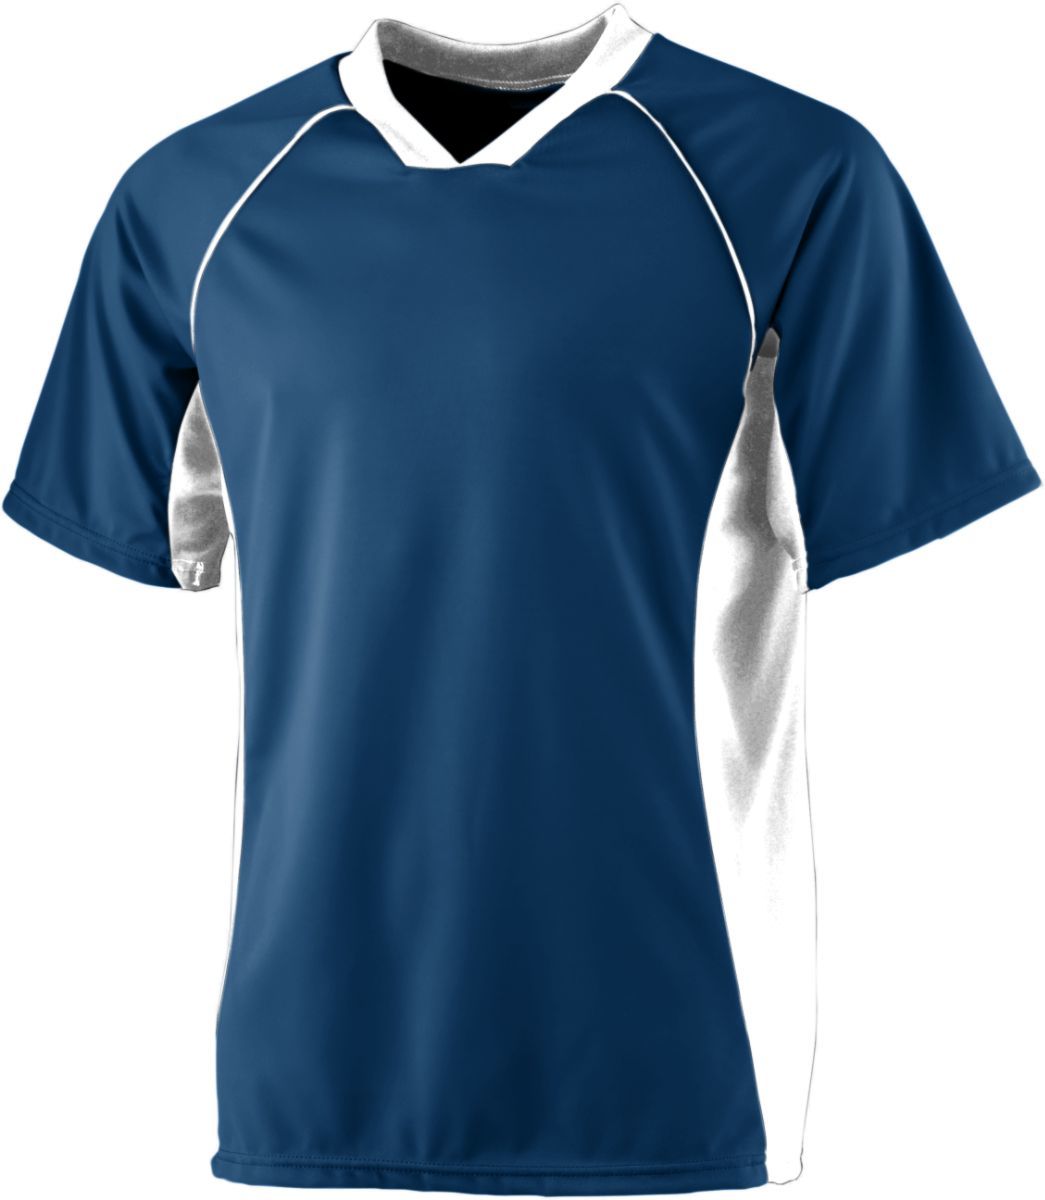 Augusta Sportswear Youth Wicking Soccer Jersey in Navy/White  -Part of the Youth, Youth-Jersey, Augusta-Products, Soccer, Shirts, All-Sports-1 product lines at KanaleyCreations.com